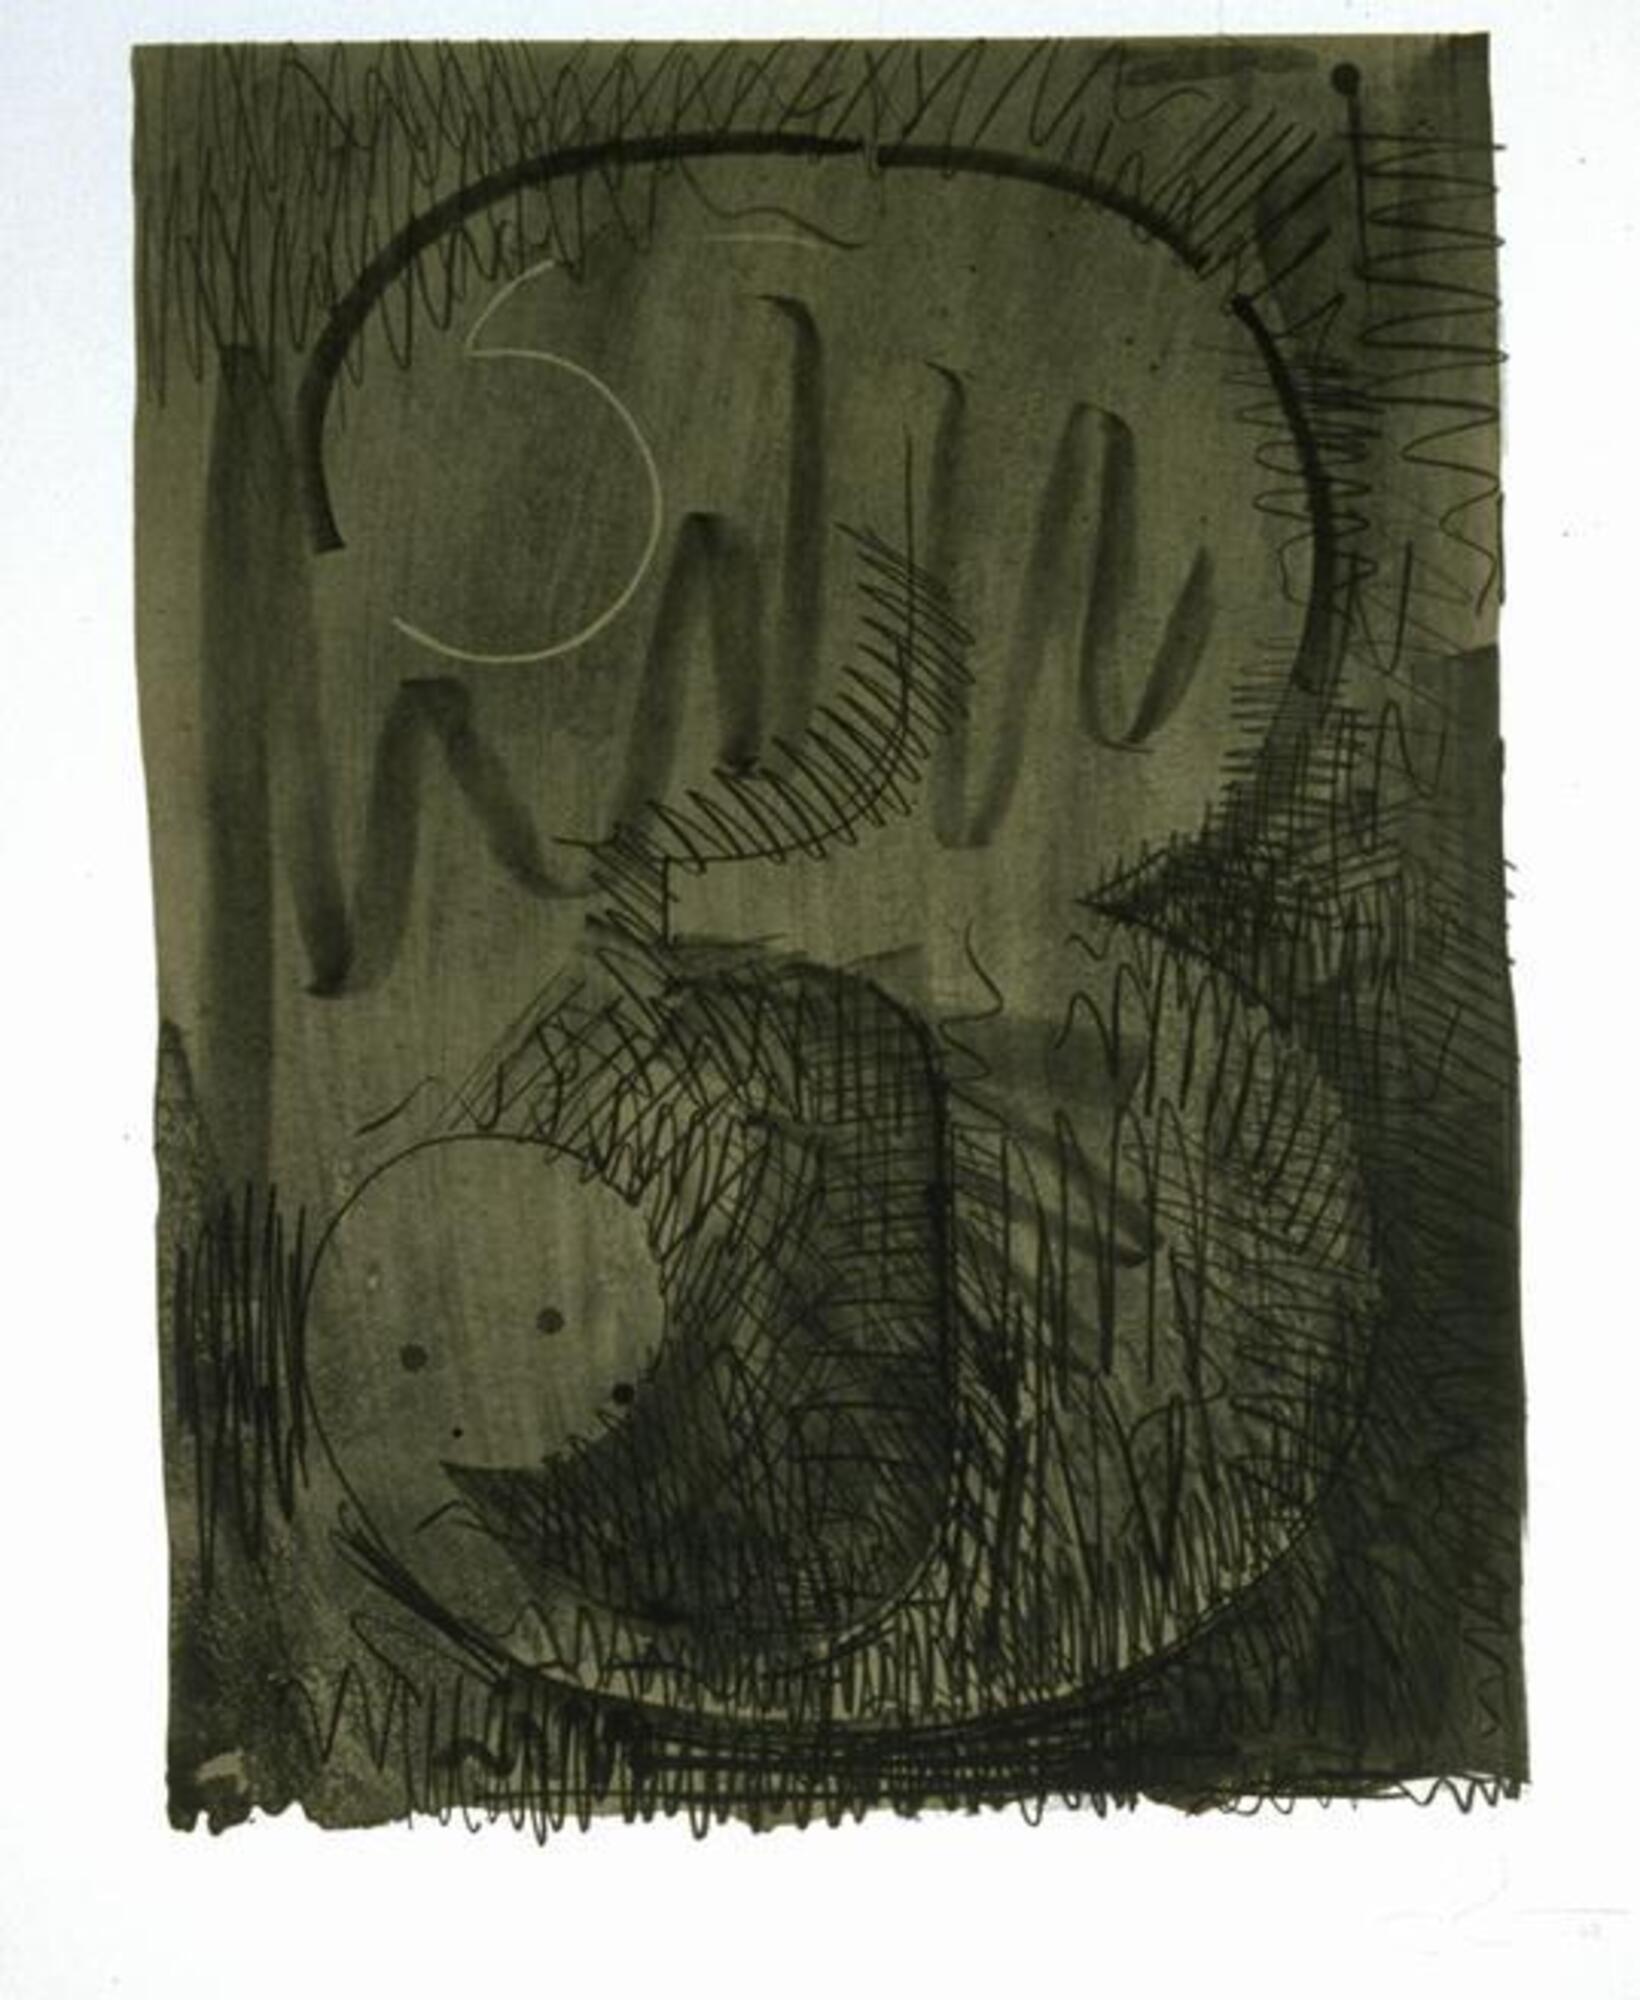 Lithograph with a large number &ldquo;three&rdquo; that dominates the composition outlined in black with areas of white outline on a taupe background with black squiggly lines throughout.